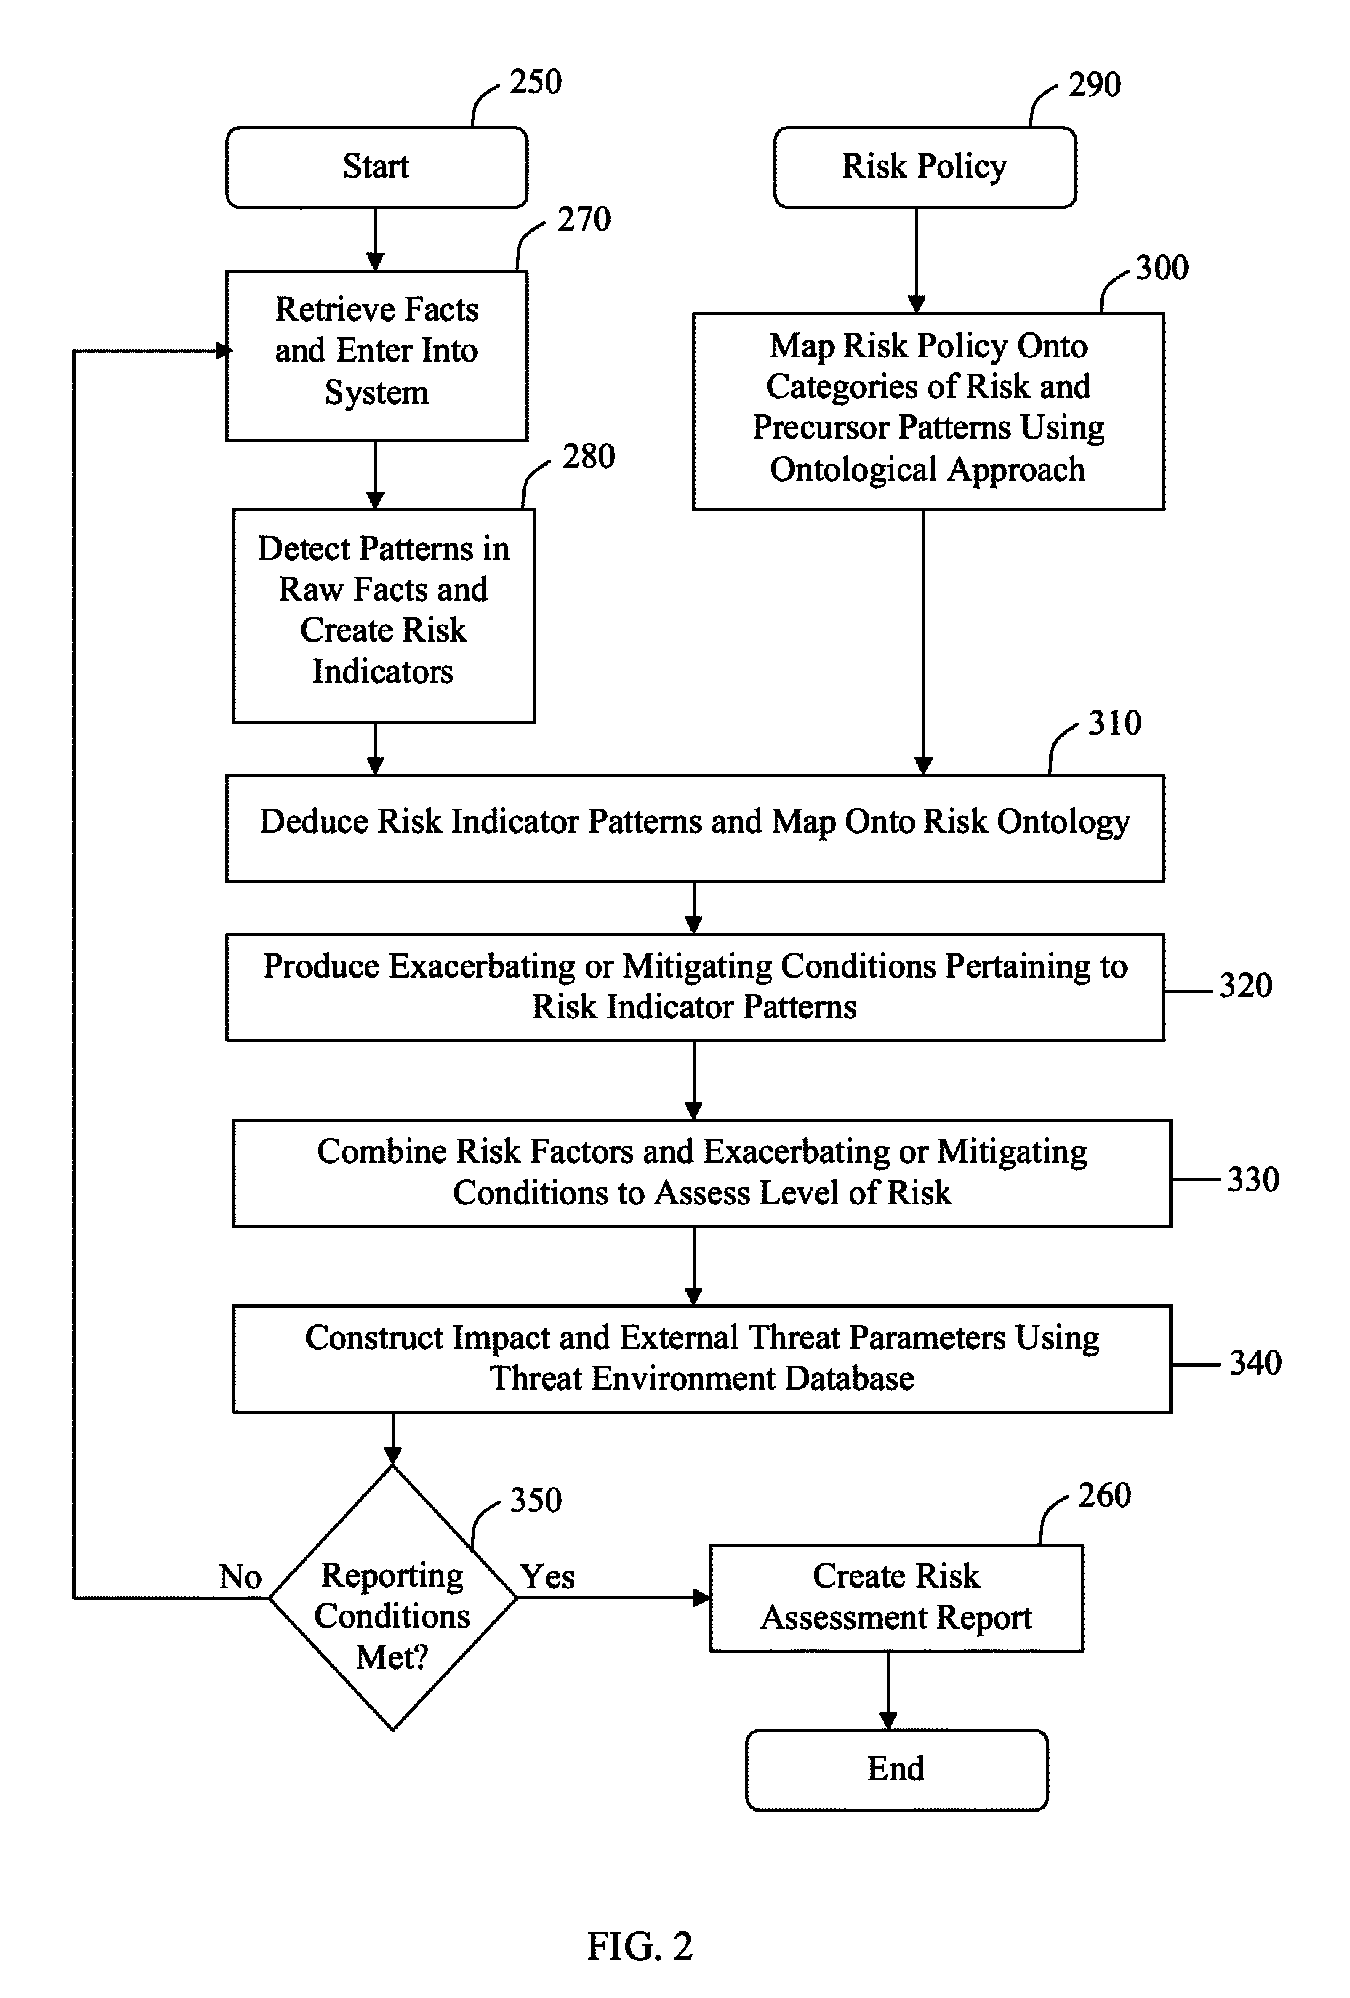 System and method for organizational risk analysis and reporting by mapping detected risk patterns onto a risk ontology